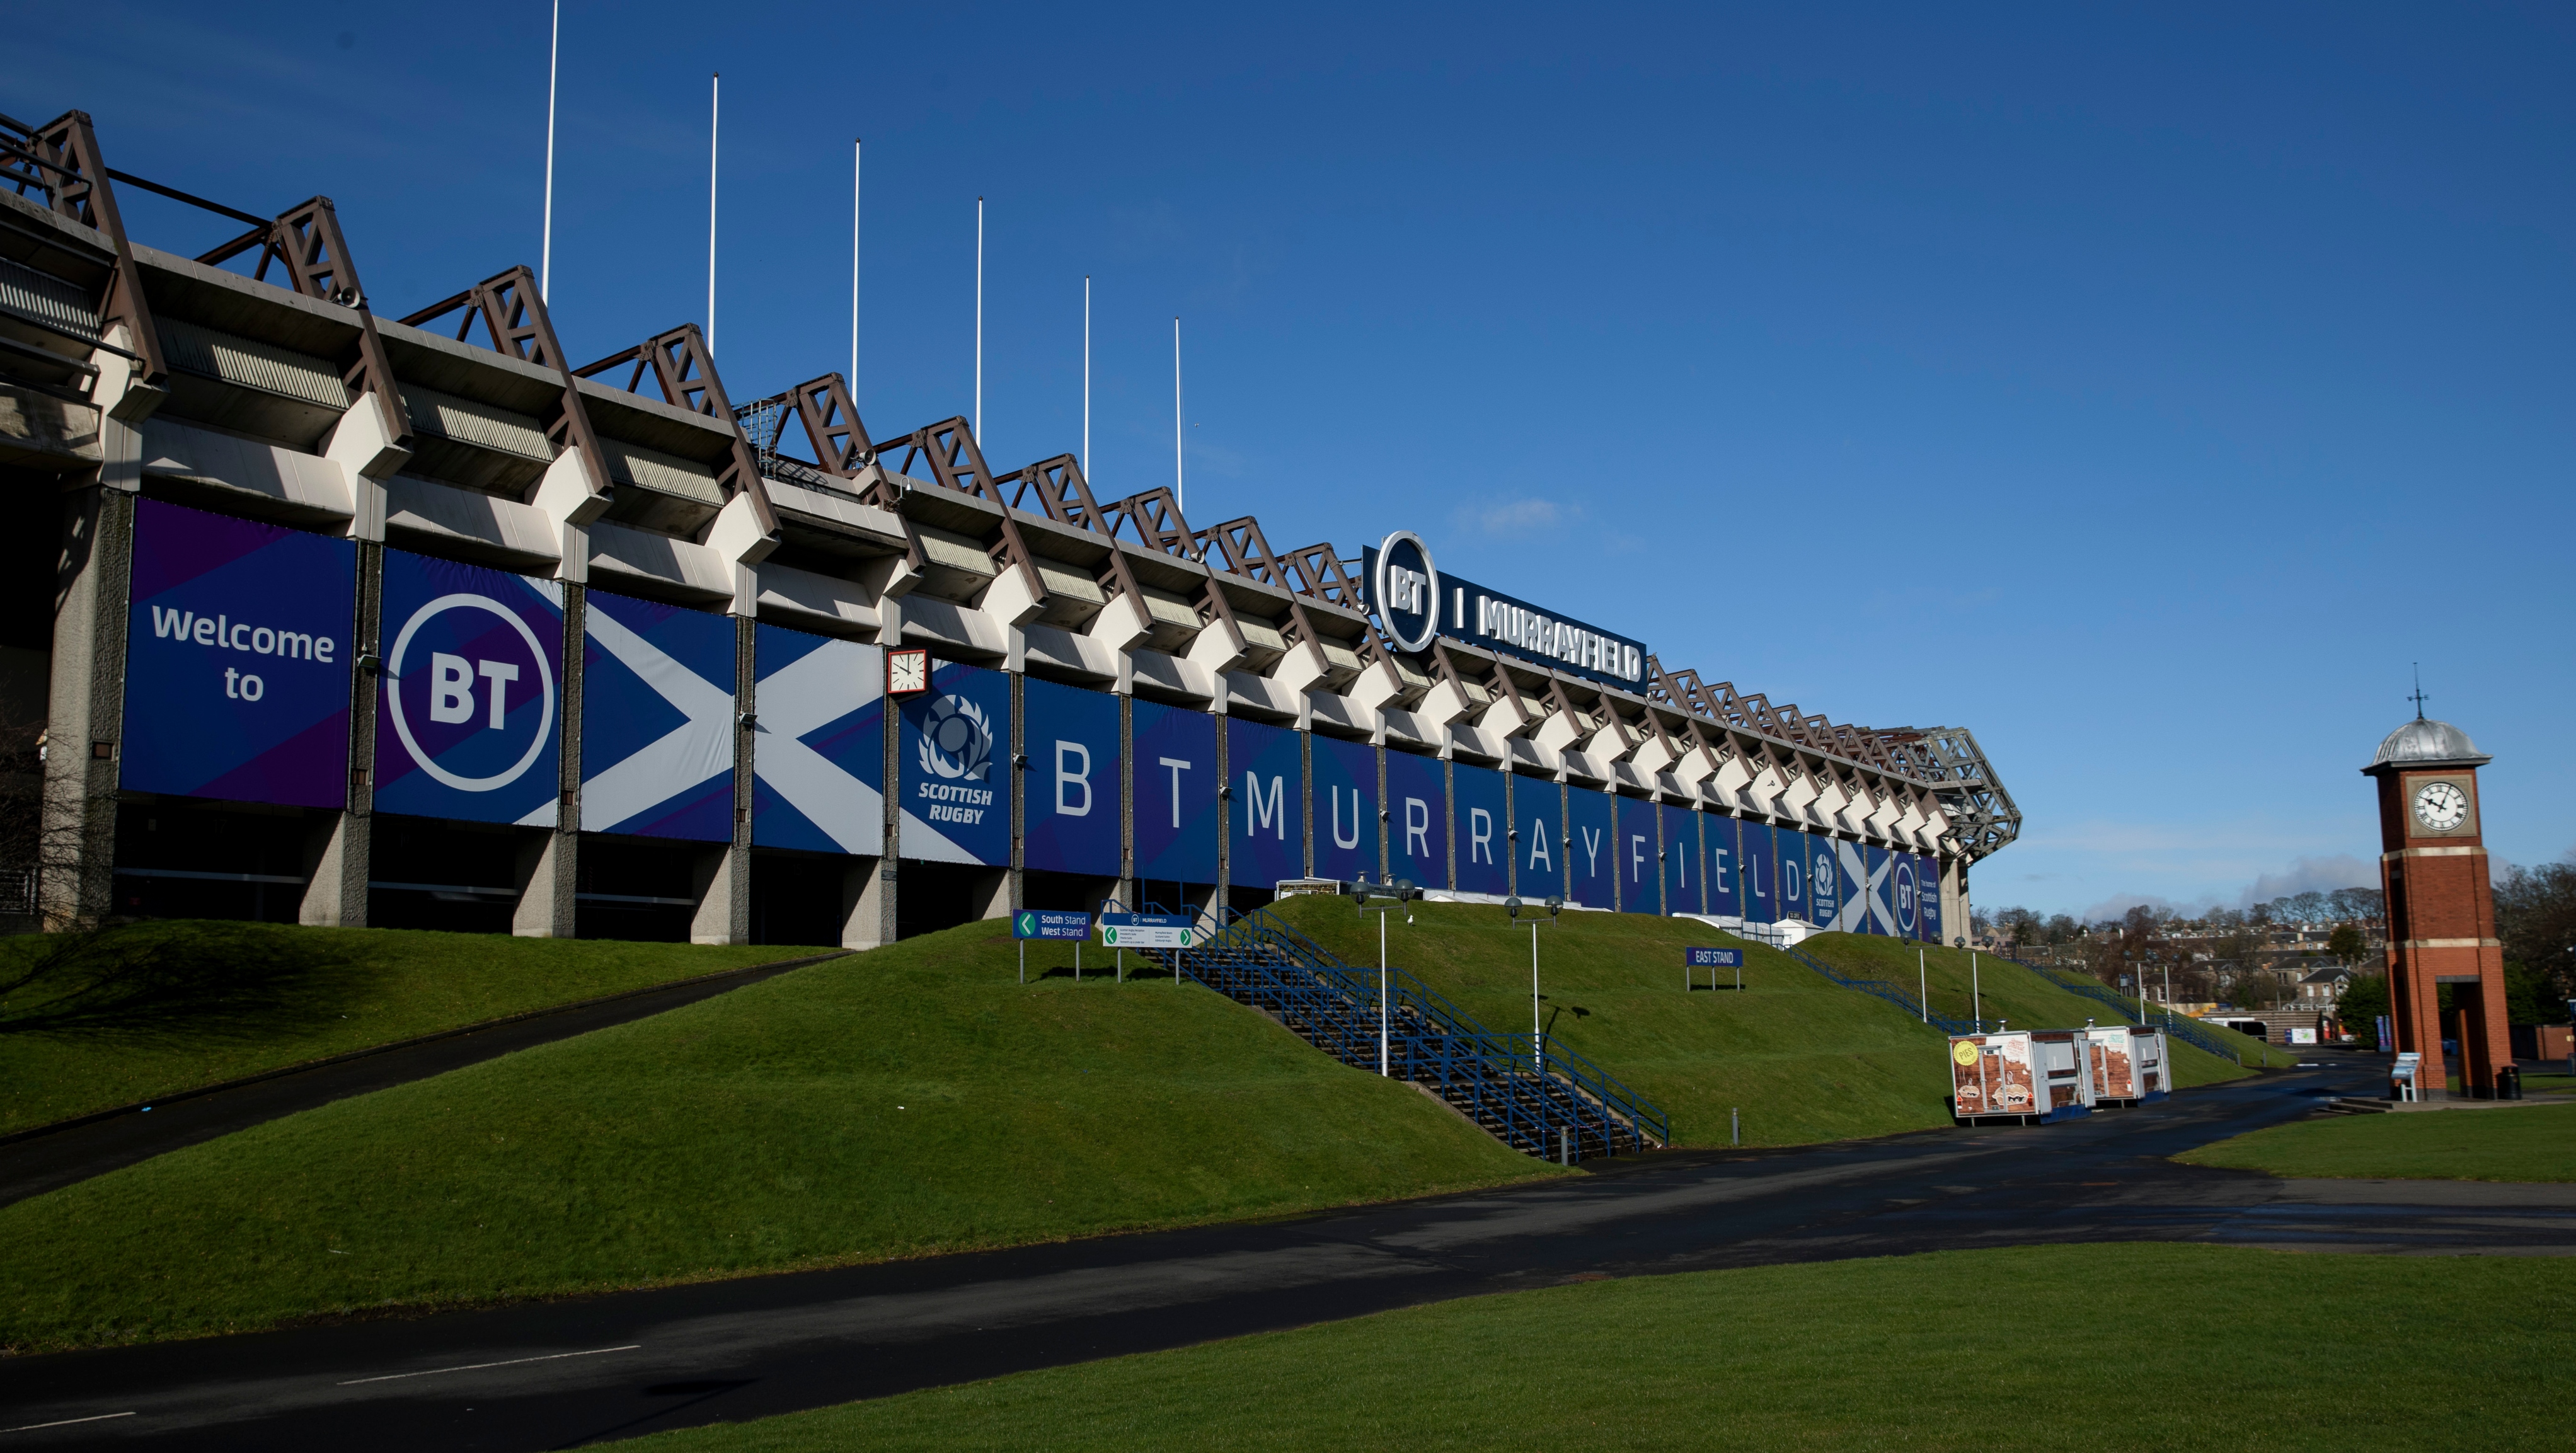 The Murrayfield faithful will be looking for signs of optimism before the World Cup.